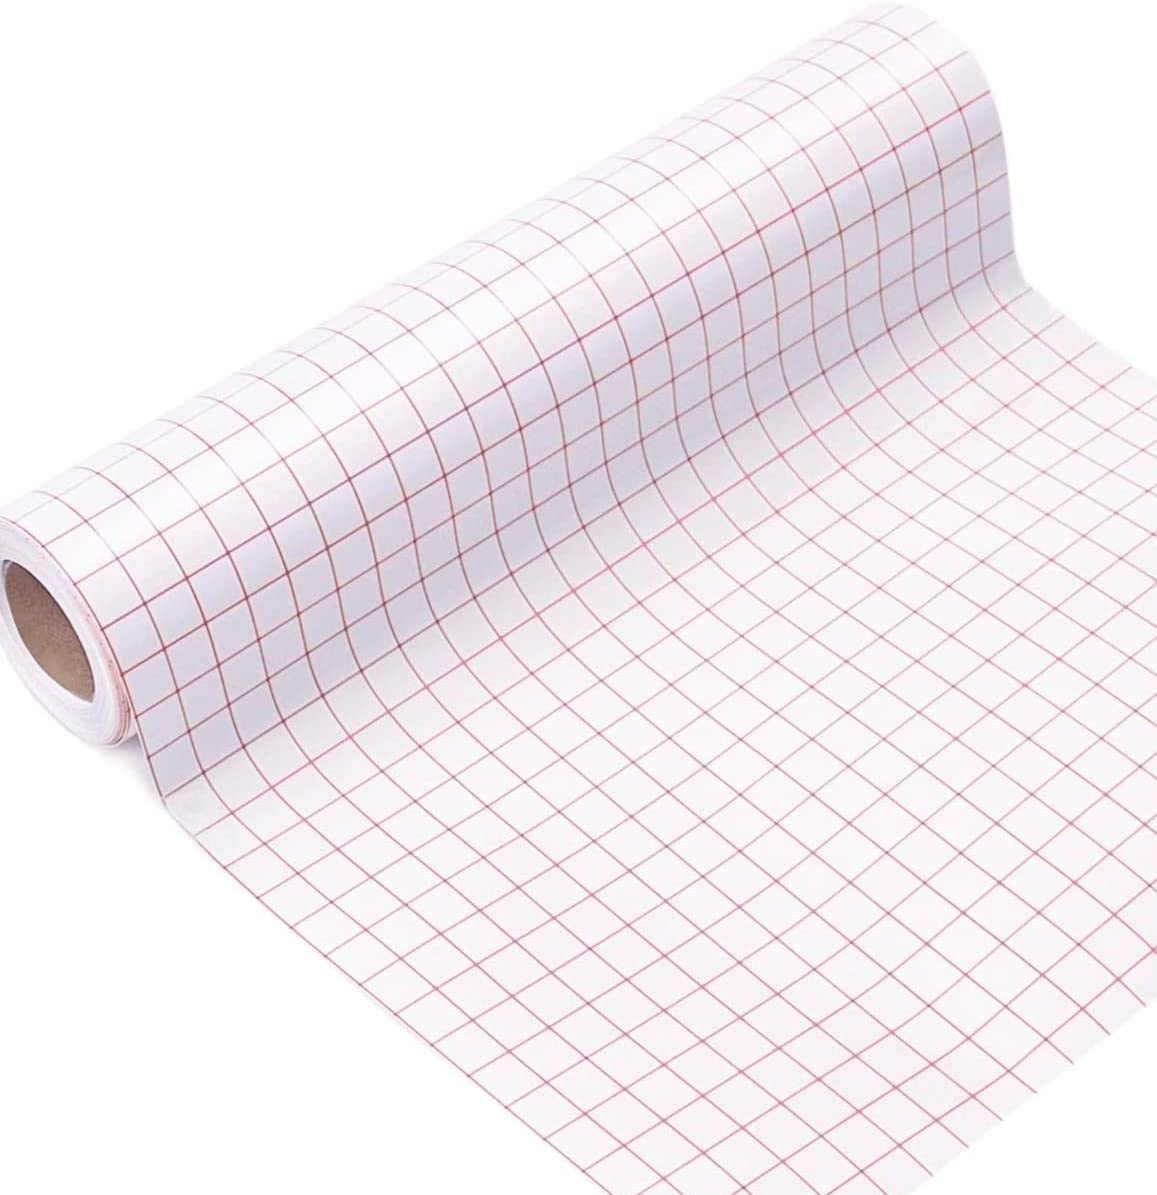 Various Specifications of Clear Medium Tack Vinyl Transfer Tape, Vinyl  Transfer Paper with Aligned Grid, Contact Paper Clear Transfer Tape, Cup  Sticker Making, Window Printing Transfer Film, PET Self-adhesive Clear  Transfer Film